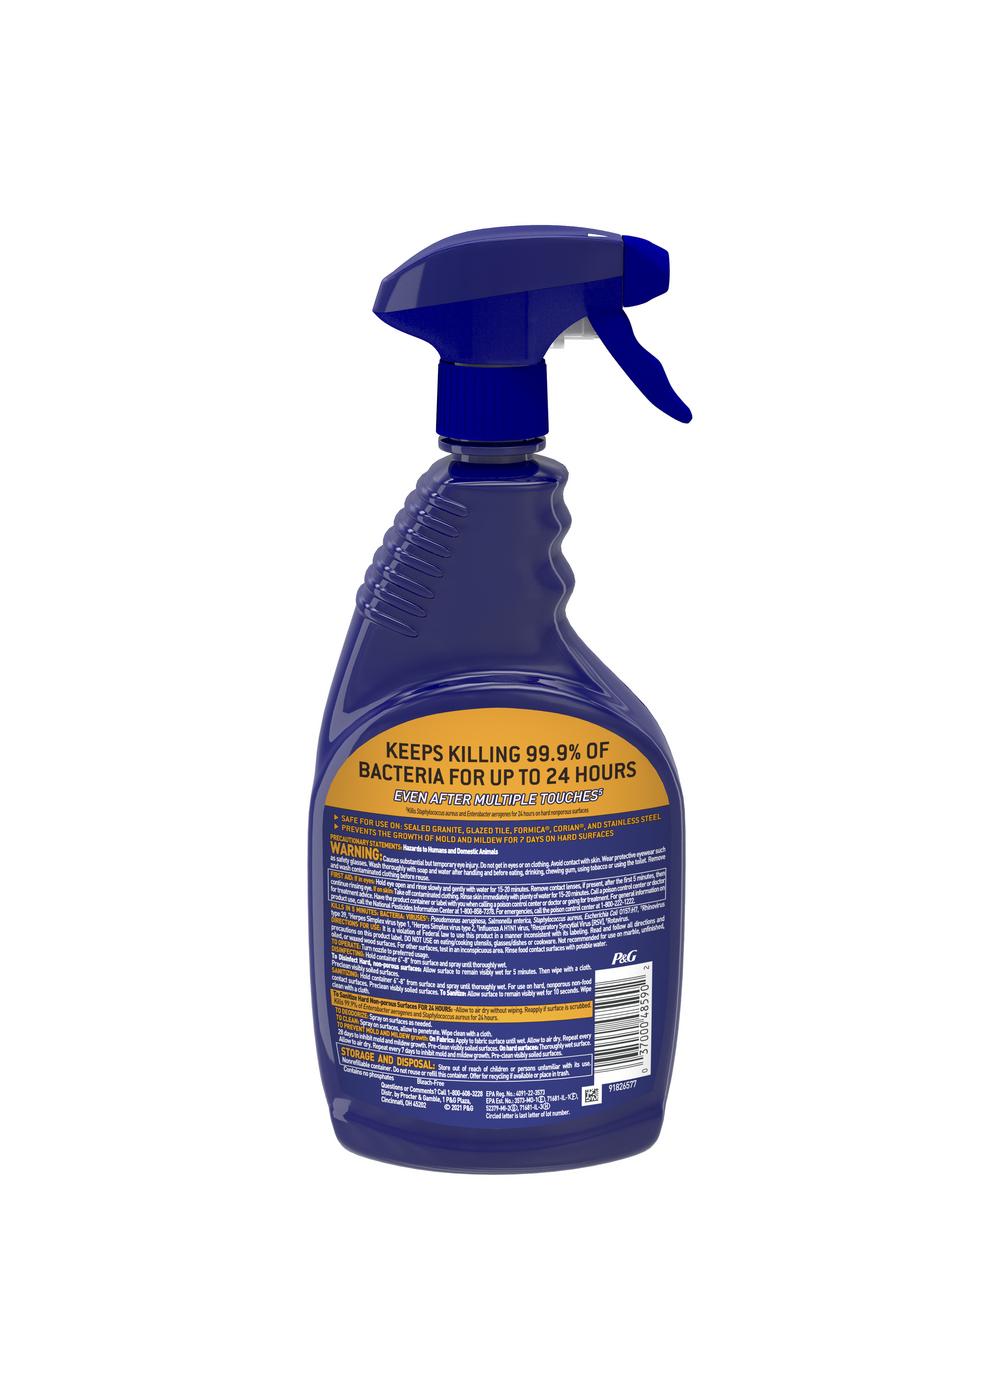 Microban Citrus 24 Hour Bathroom Cleaner and Sanitizing Spray; image 2 of 11